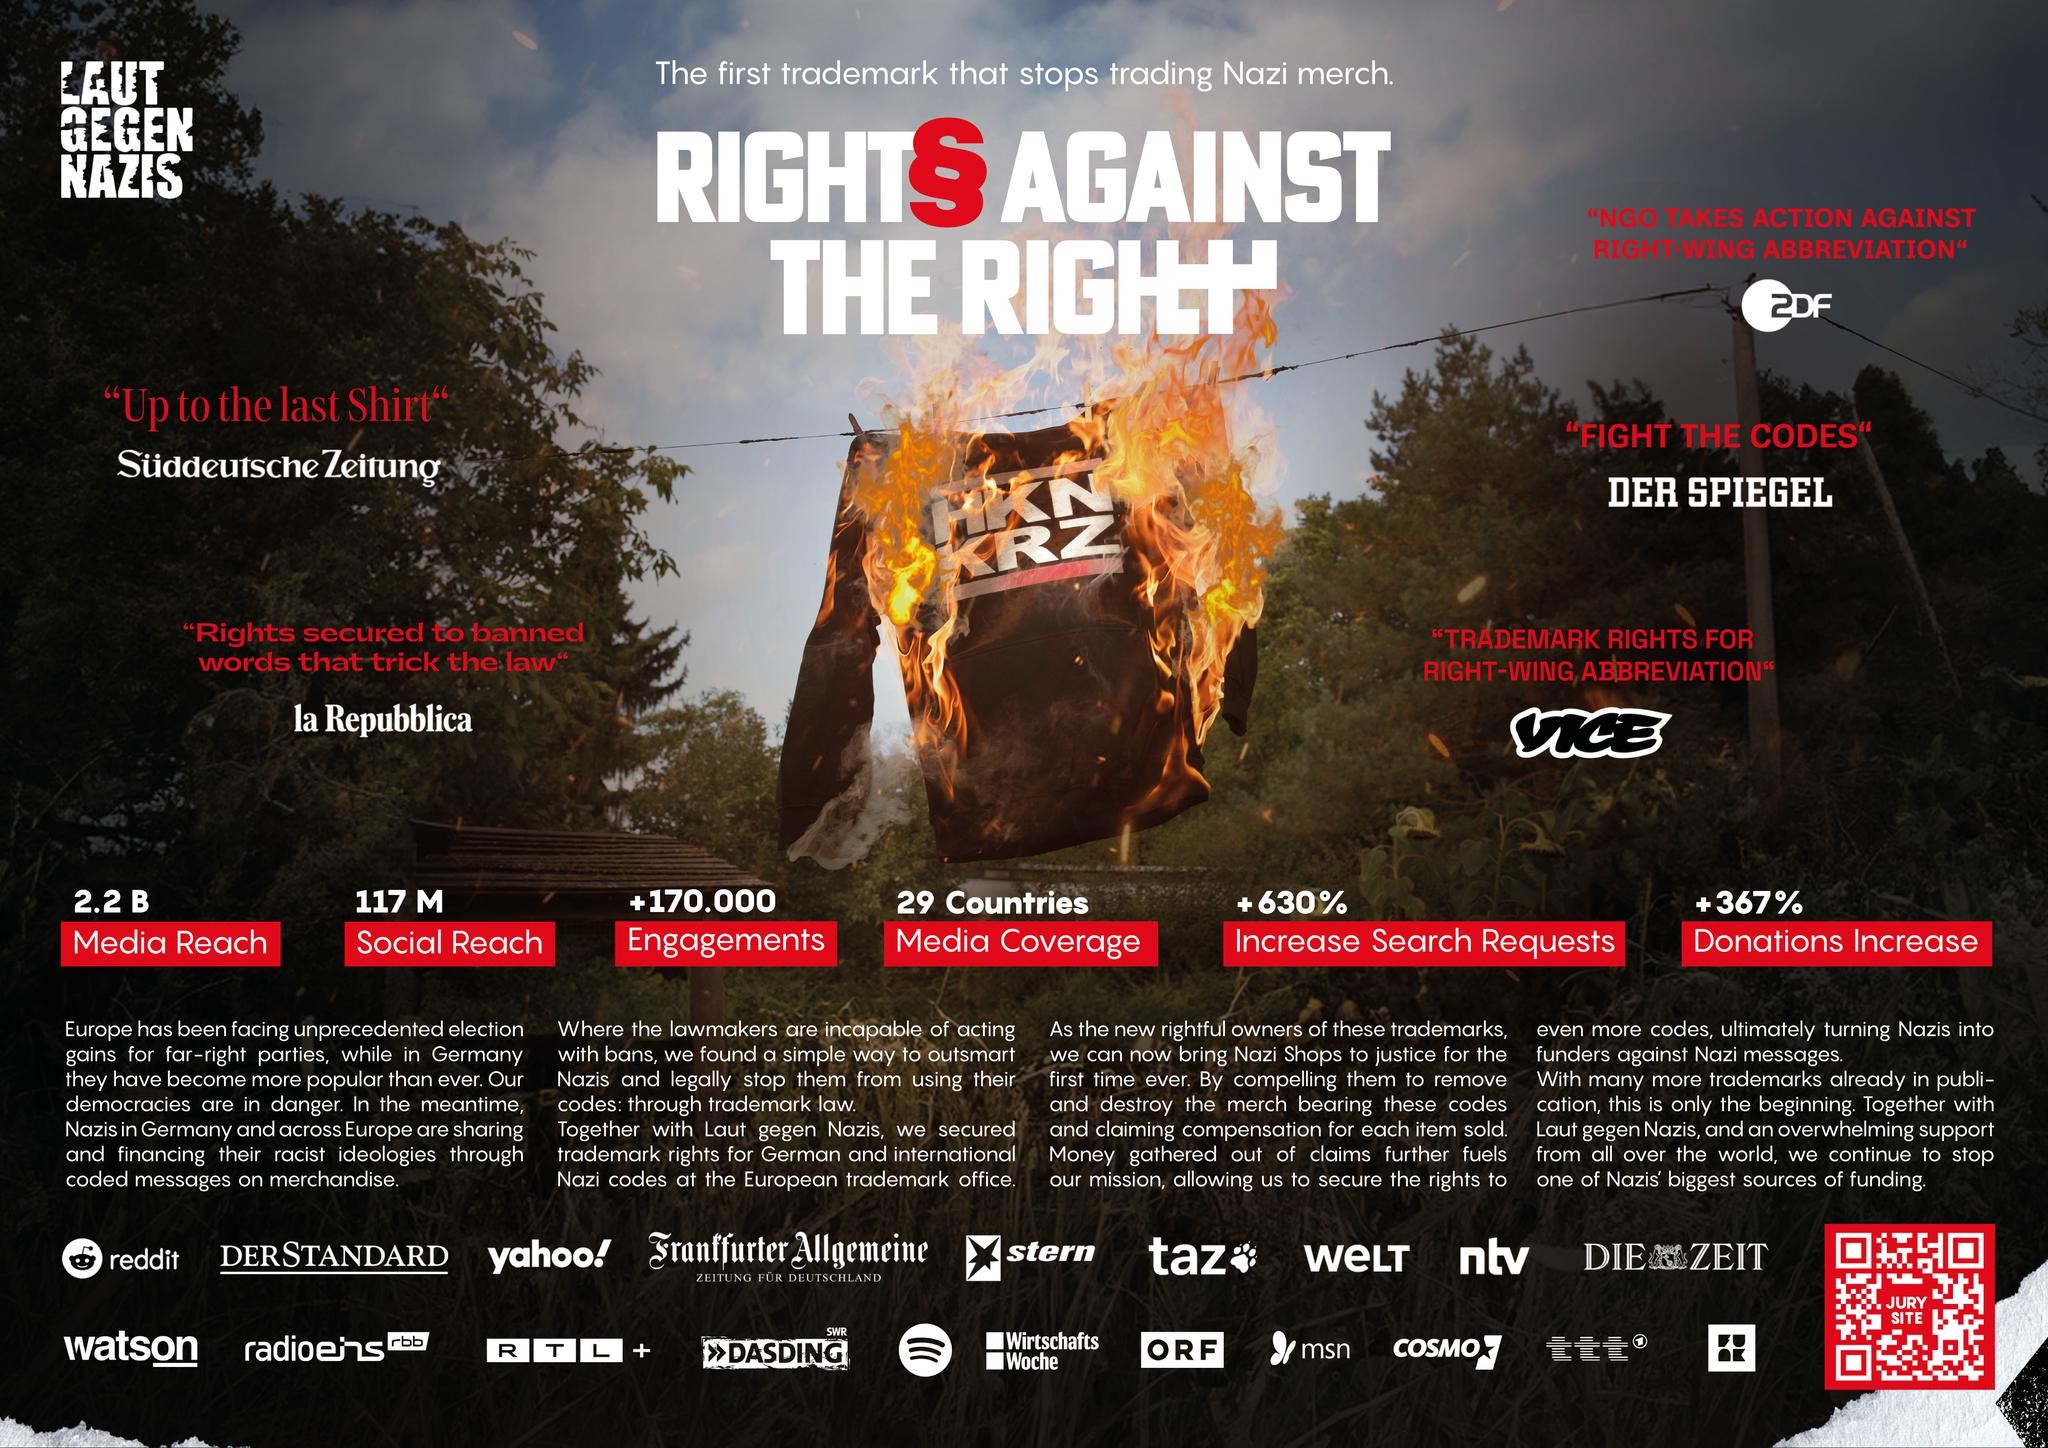 RIGHTS AGAINST THE RIGHT